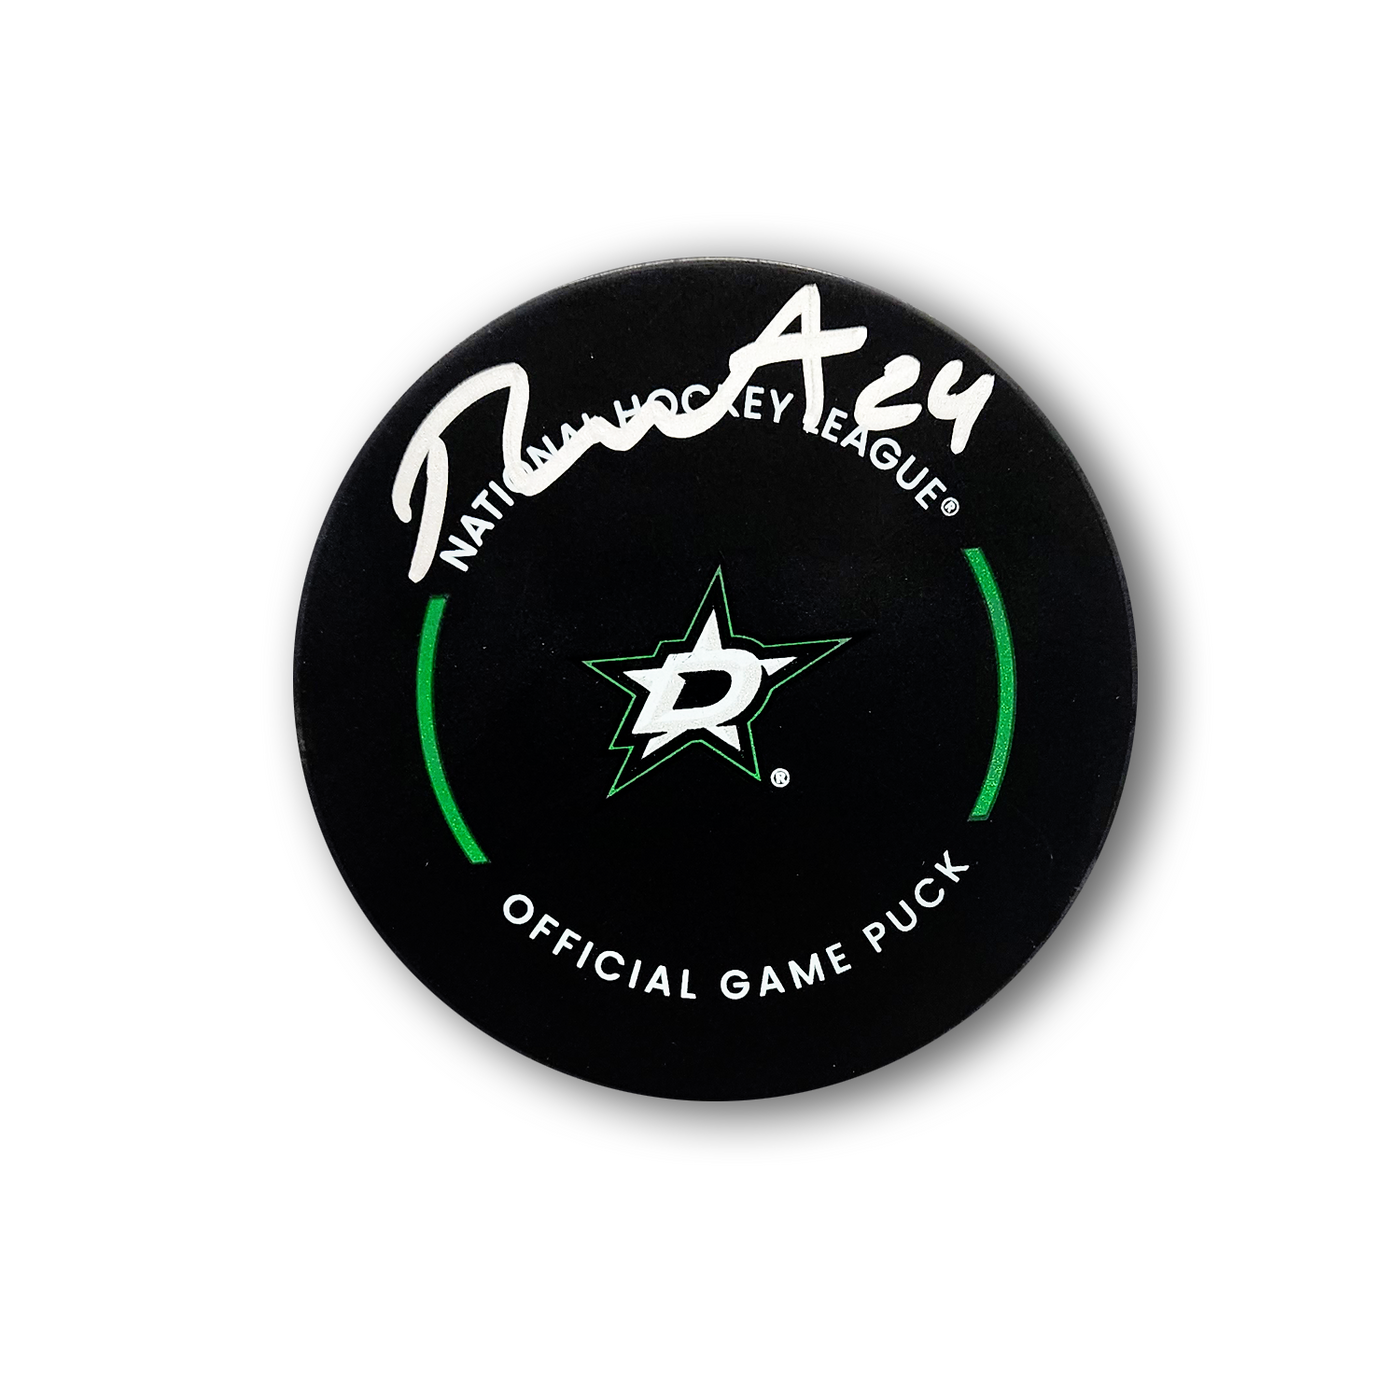 Roope Hintz Autographed Dallas Stars Official Hockey Puck